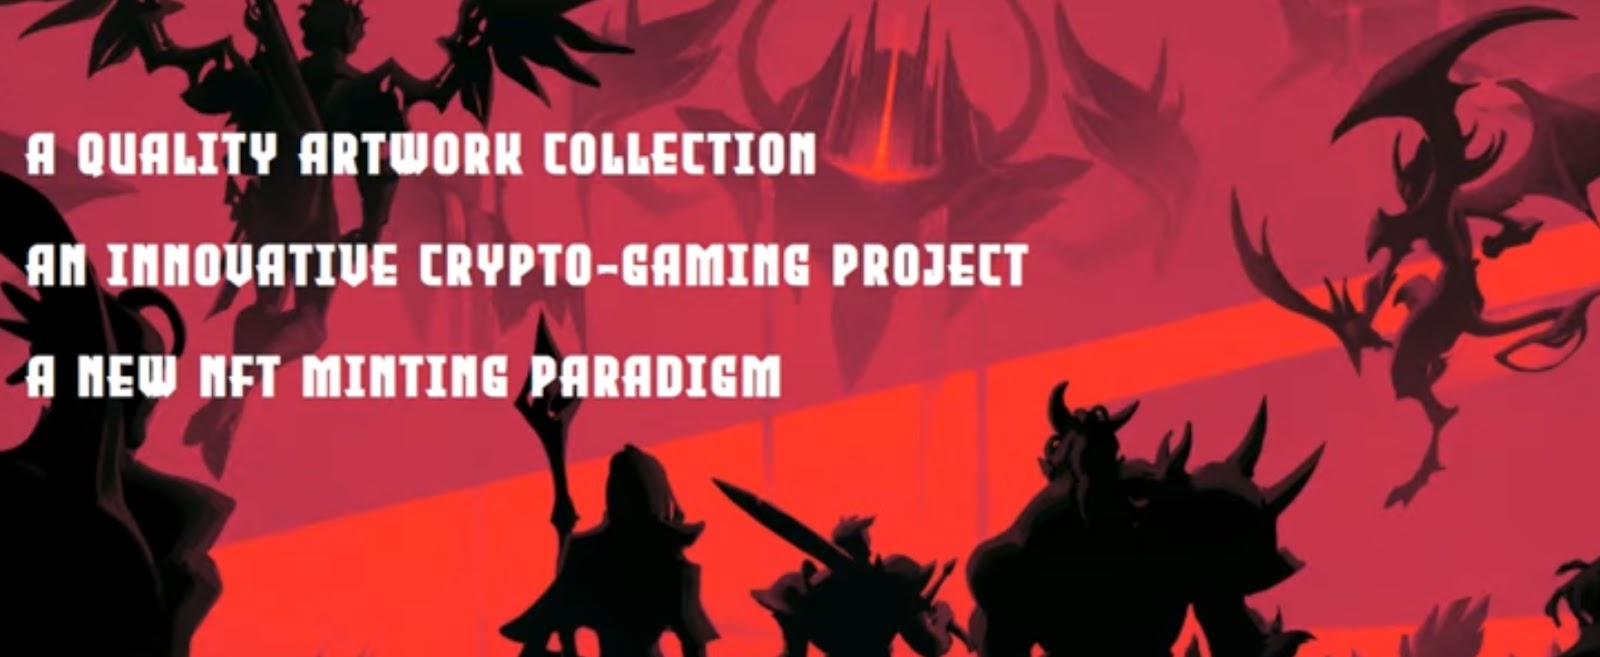 Promotional graphic for a crypto-gaming project featuring silhouettes of mythical creatures against